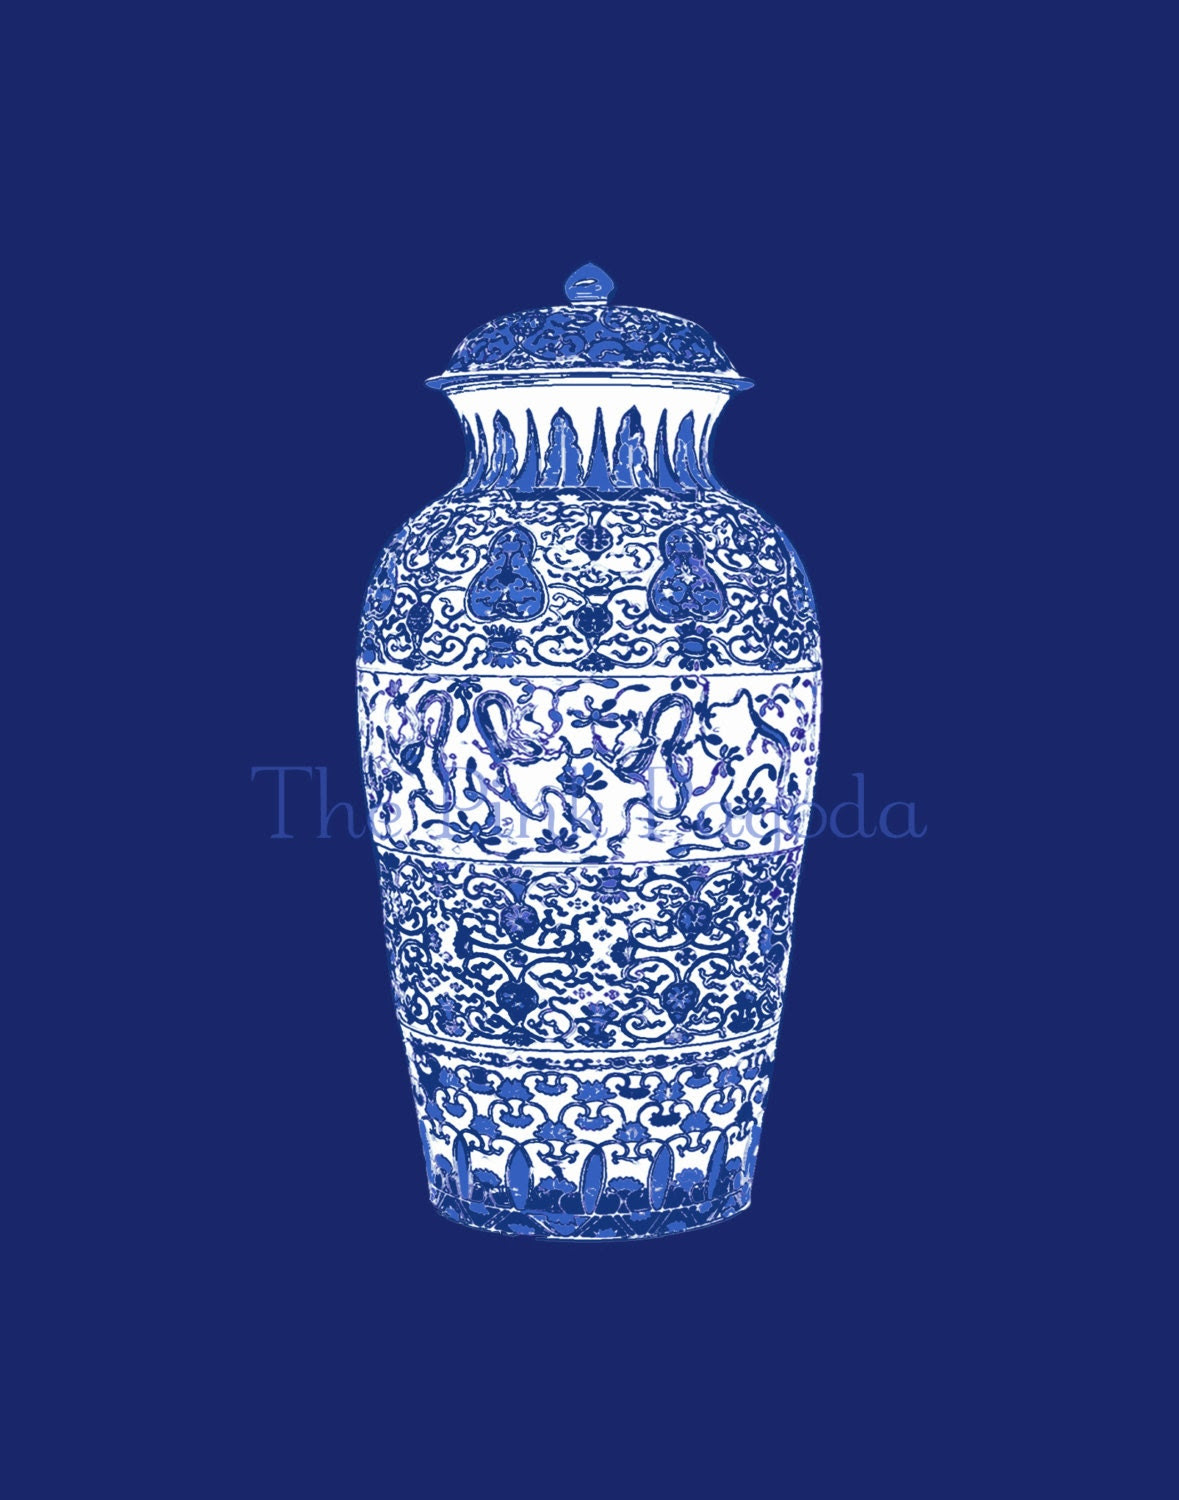 Blue and White Chinese Ginger Jar on Navy  11x14 Giclee